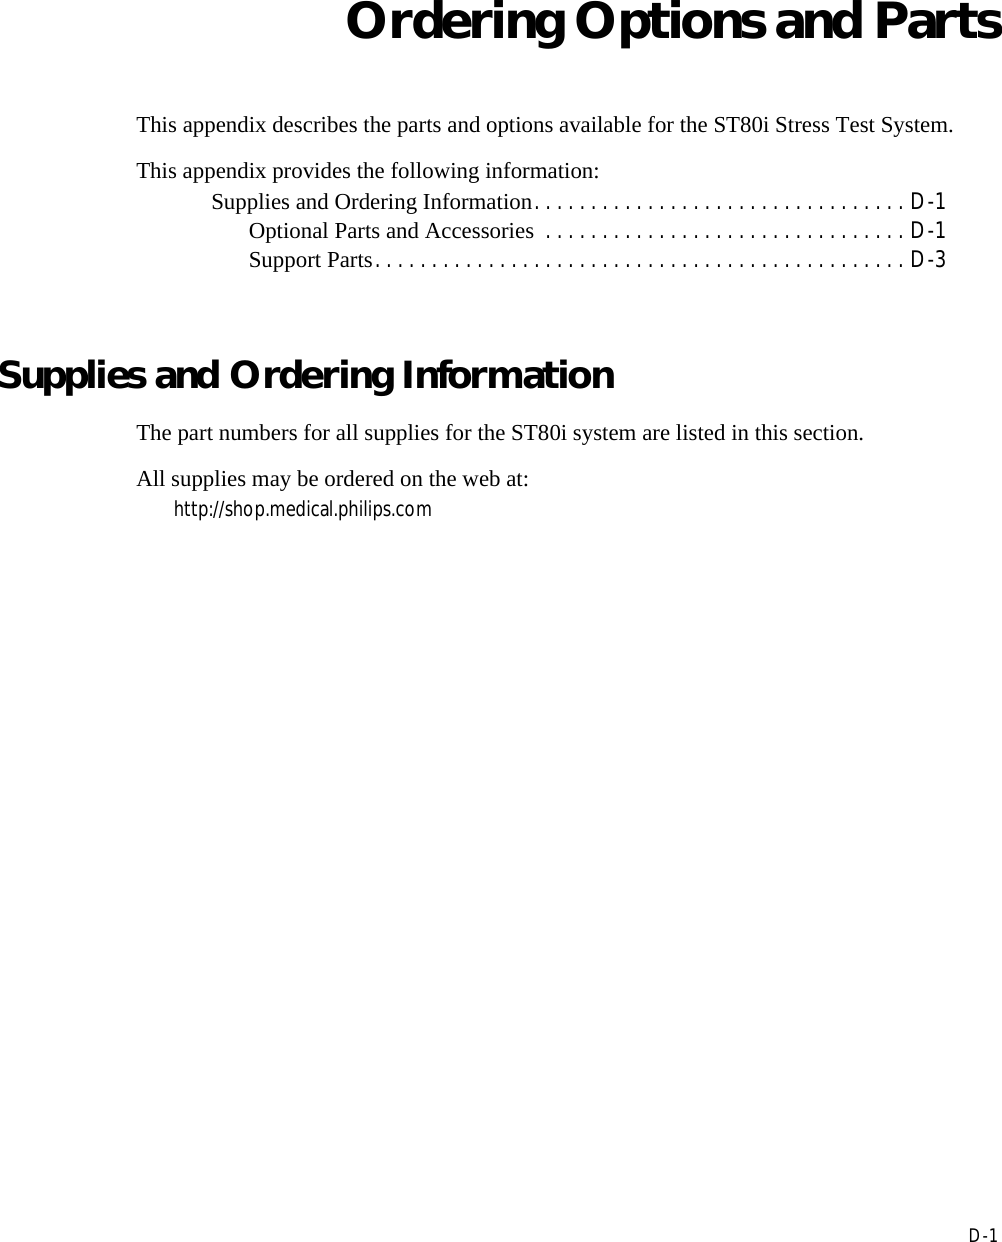 DD-1Appendix AOrdering Options and PartsThis appendix describes the parts and options available for the ST80i Stress Test System.This appendix provides the following information:Supplies and Ordering Information. . . . . . . . . . . . . . . . . . . . . . . . . . . . . . . . . D-1Optional Parts and Accessories  . . . . . . . . . . . . . . . . . . . . . . . . . . . . . . . . D-1Support Parts. . . . . . . . . . . . . . . . . . . . . . . . . . . . . . . . . . . . . . . . . . . . . . . D-3Supplies and Ordering InformationThe part numbers for all supplies for the ST80i system are listed in this section. All supplies may be ordered on the web at:http://shop.medical.philips.com